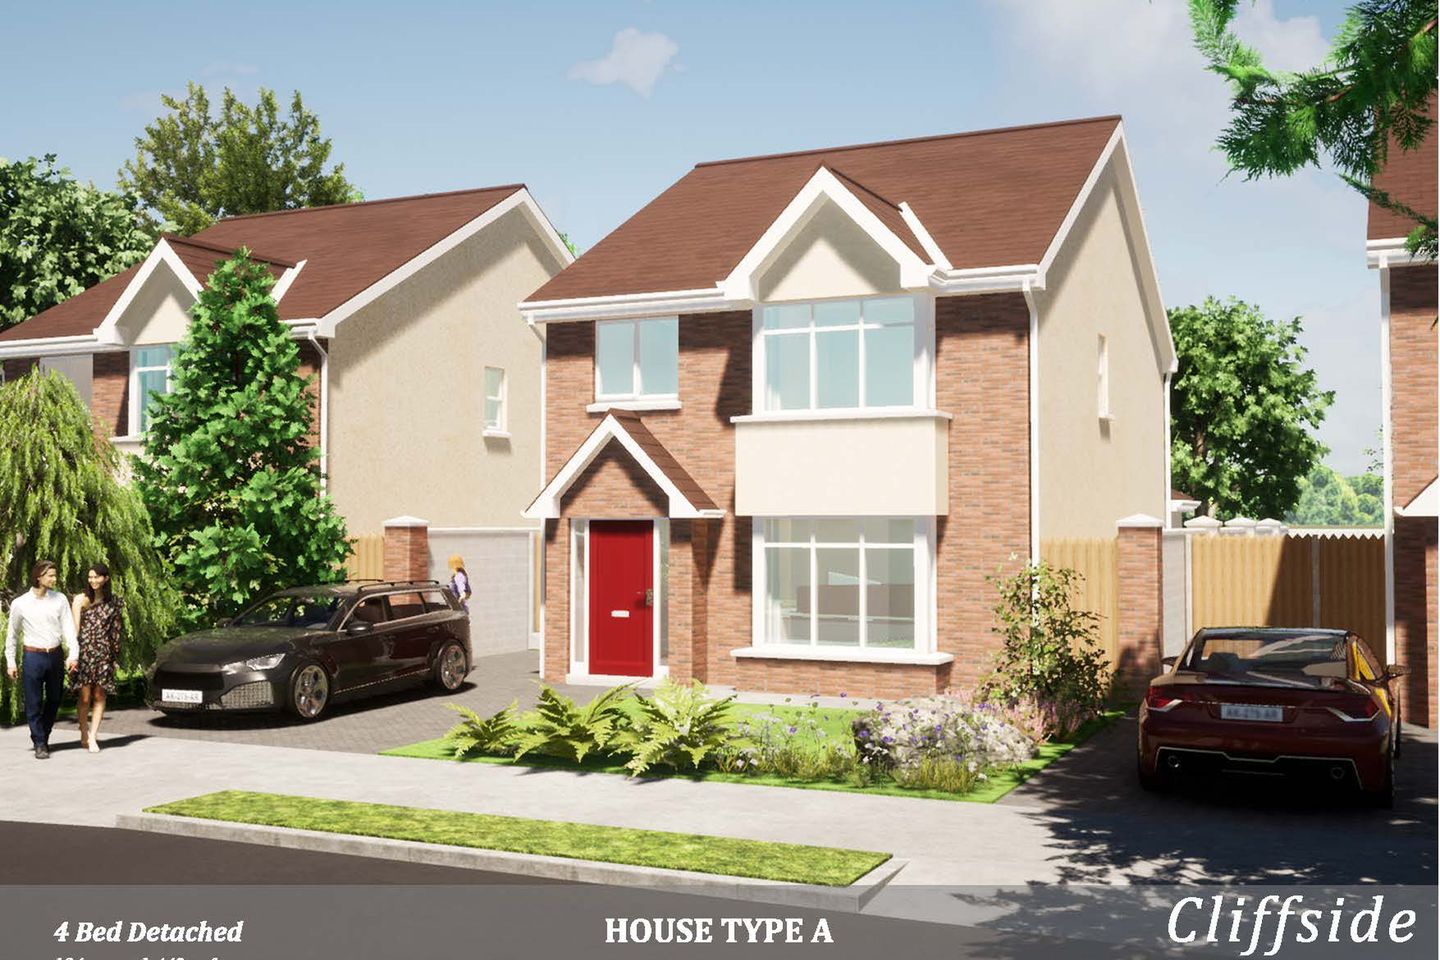 4 Bedroomed Detached - A House Type, Cliffside, Newtown Glen, Tramore, Co. Waterford., Cliffside, Newtown Glen, Tramore, Cliffside, Newtown Glen, Tramo, Tramore, Co. Waterford